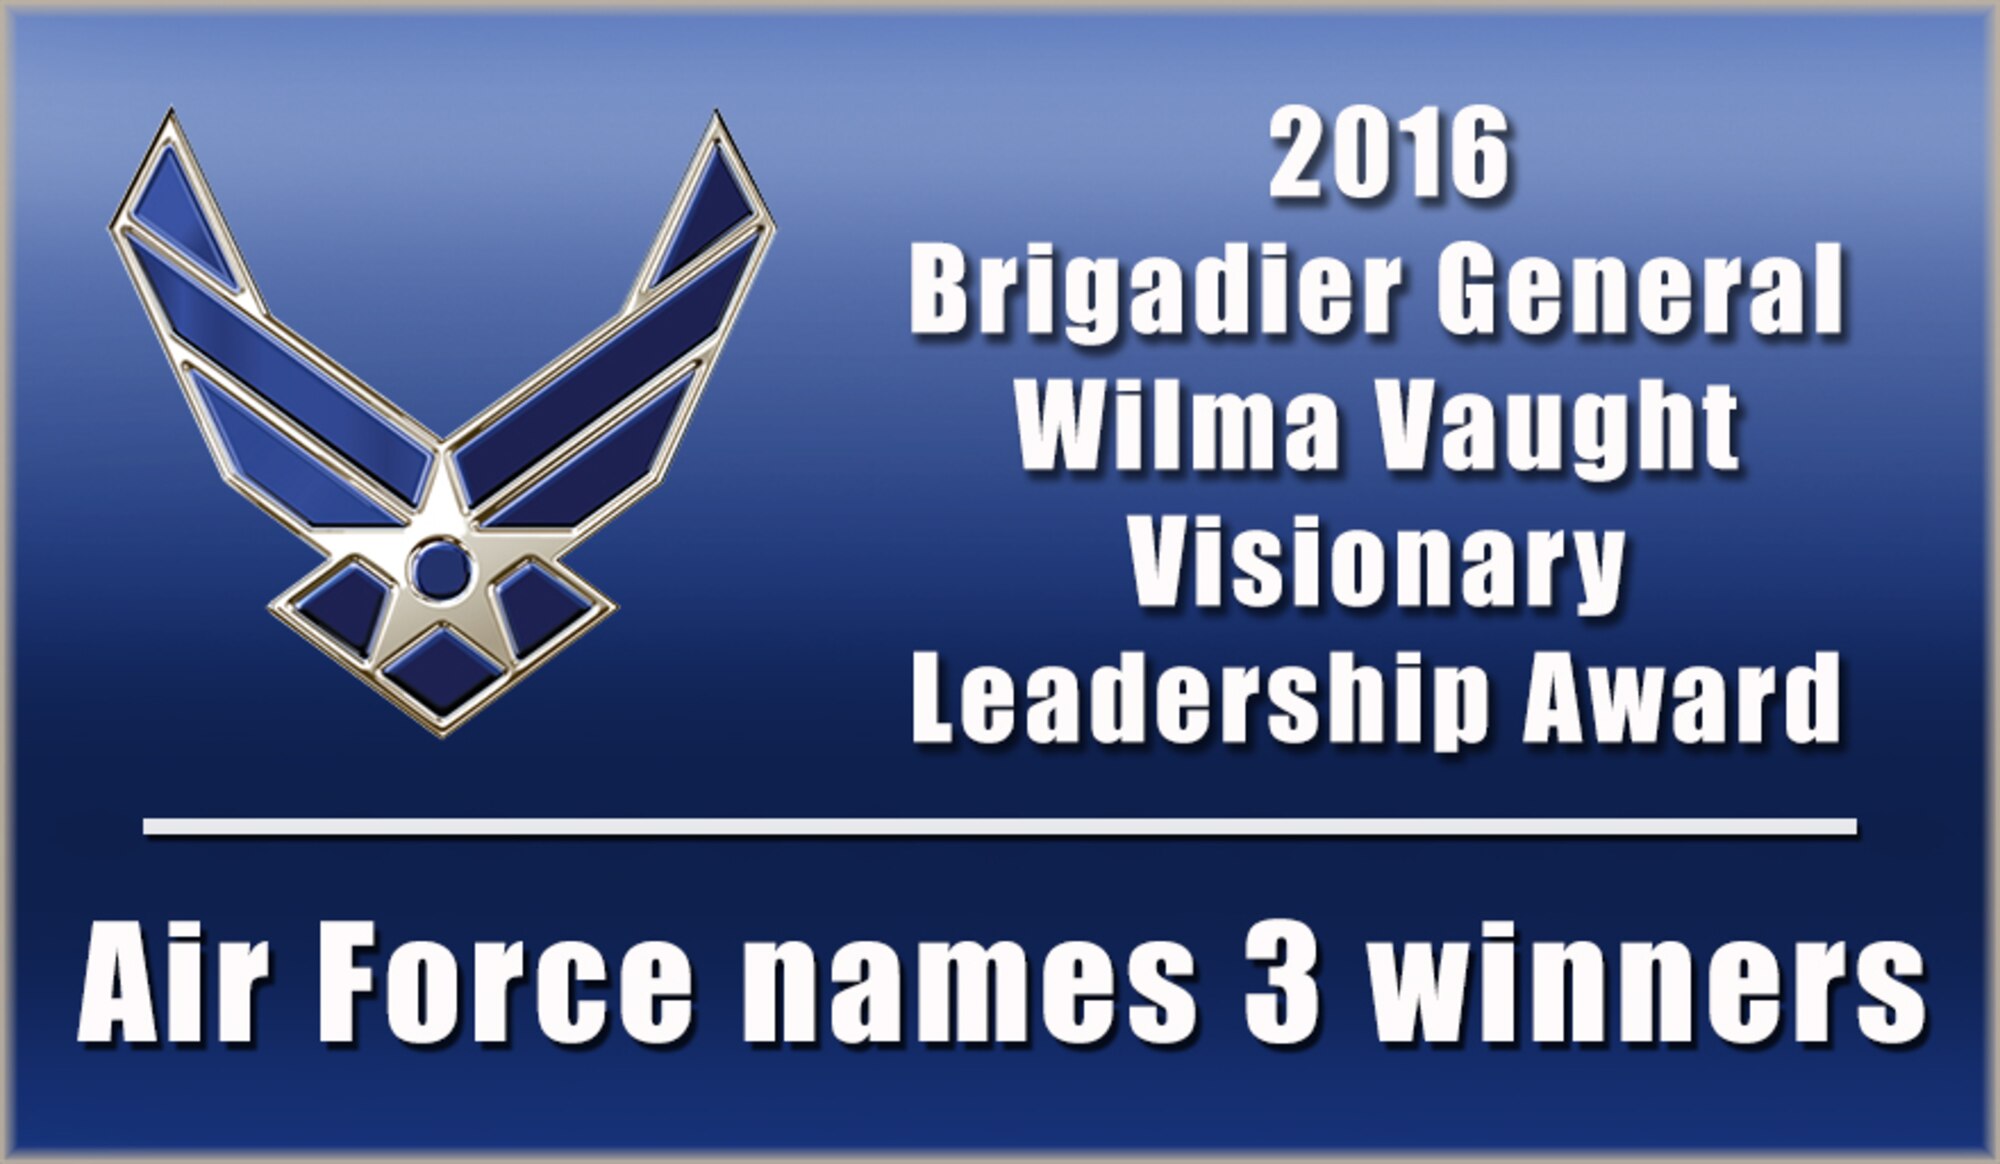 Air Force officials recently named the winners of the 2016 Brigadier General Wilma Vaught Visionary Leadership Award.